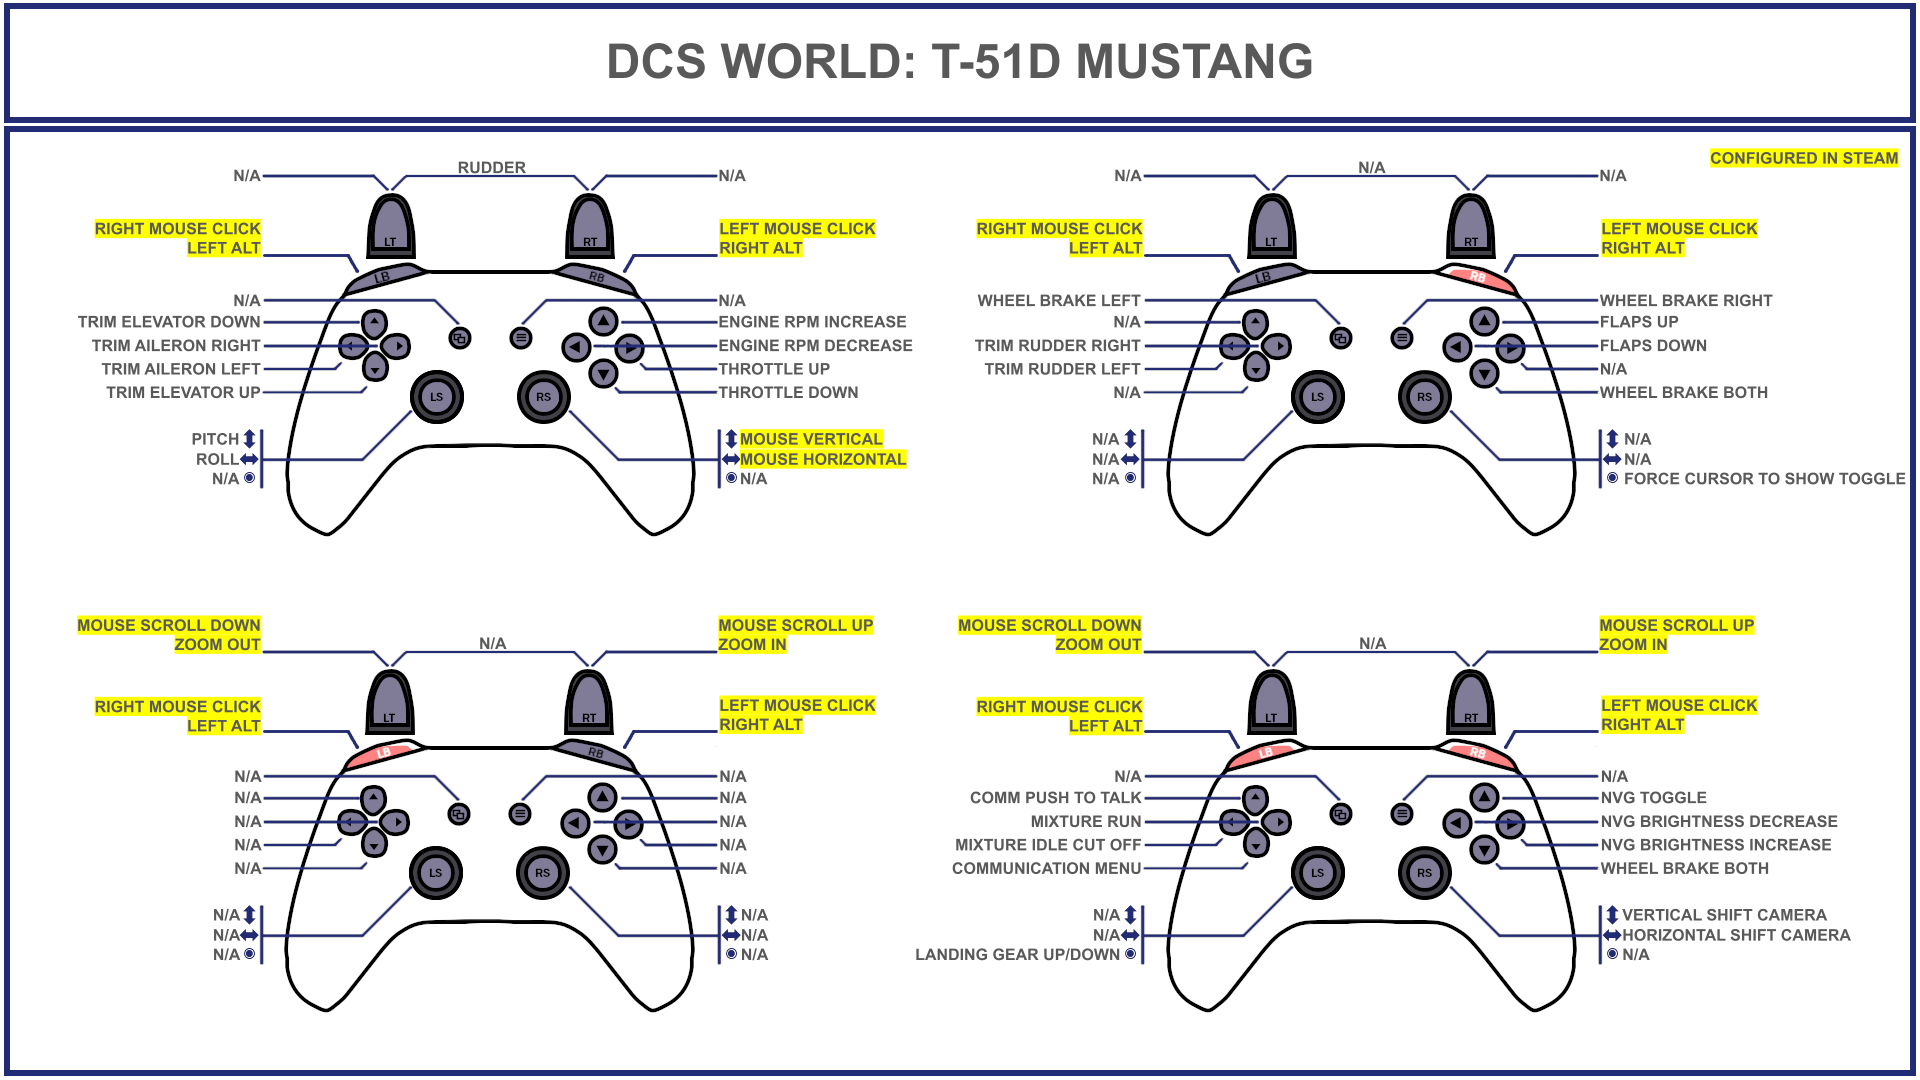 Tuuvas' Official TF-51D Mustang Gamepad Controller Layout